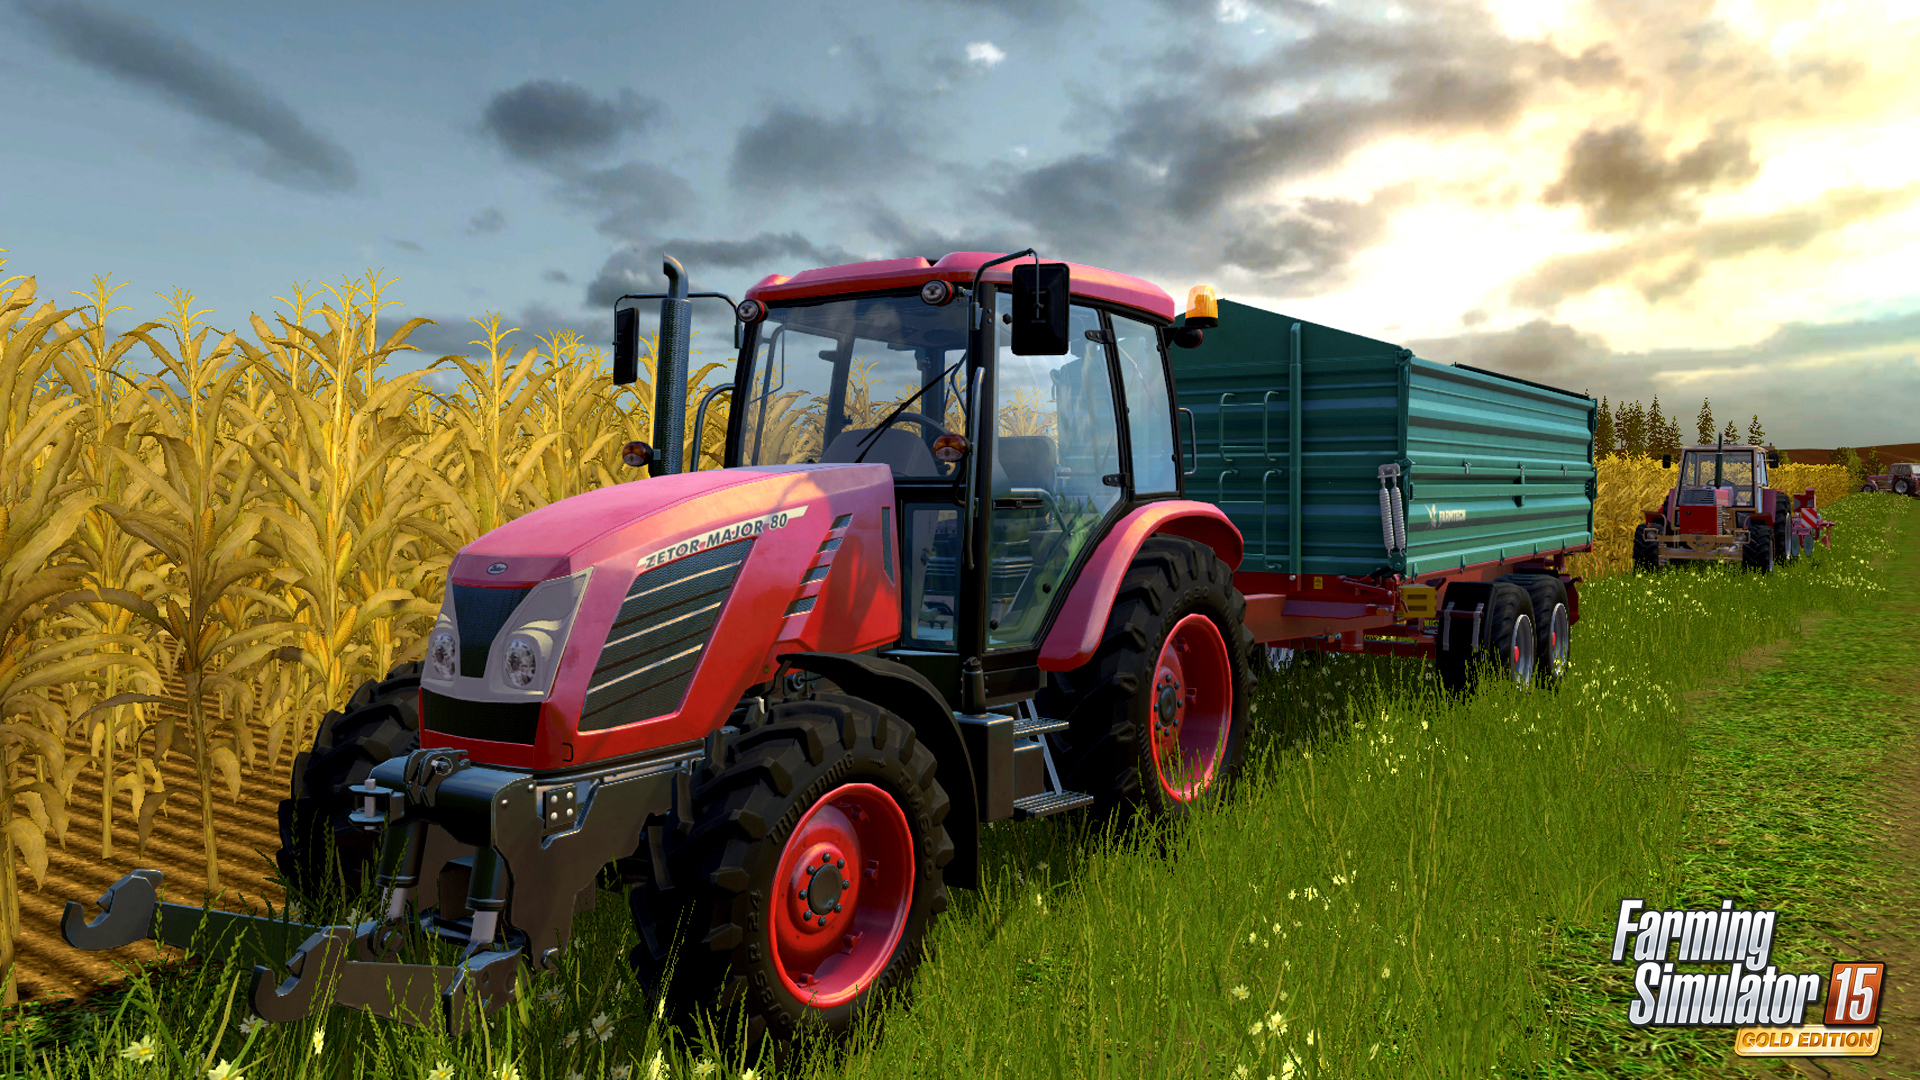 Farming Simulator 15 has been out for a little while already, but the 